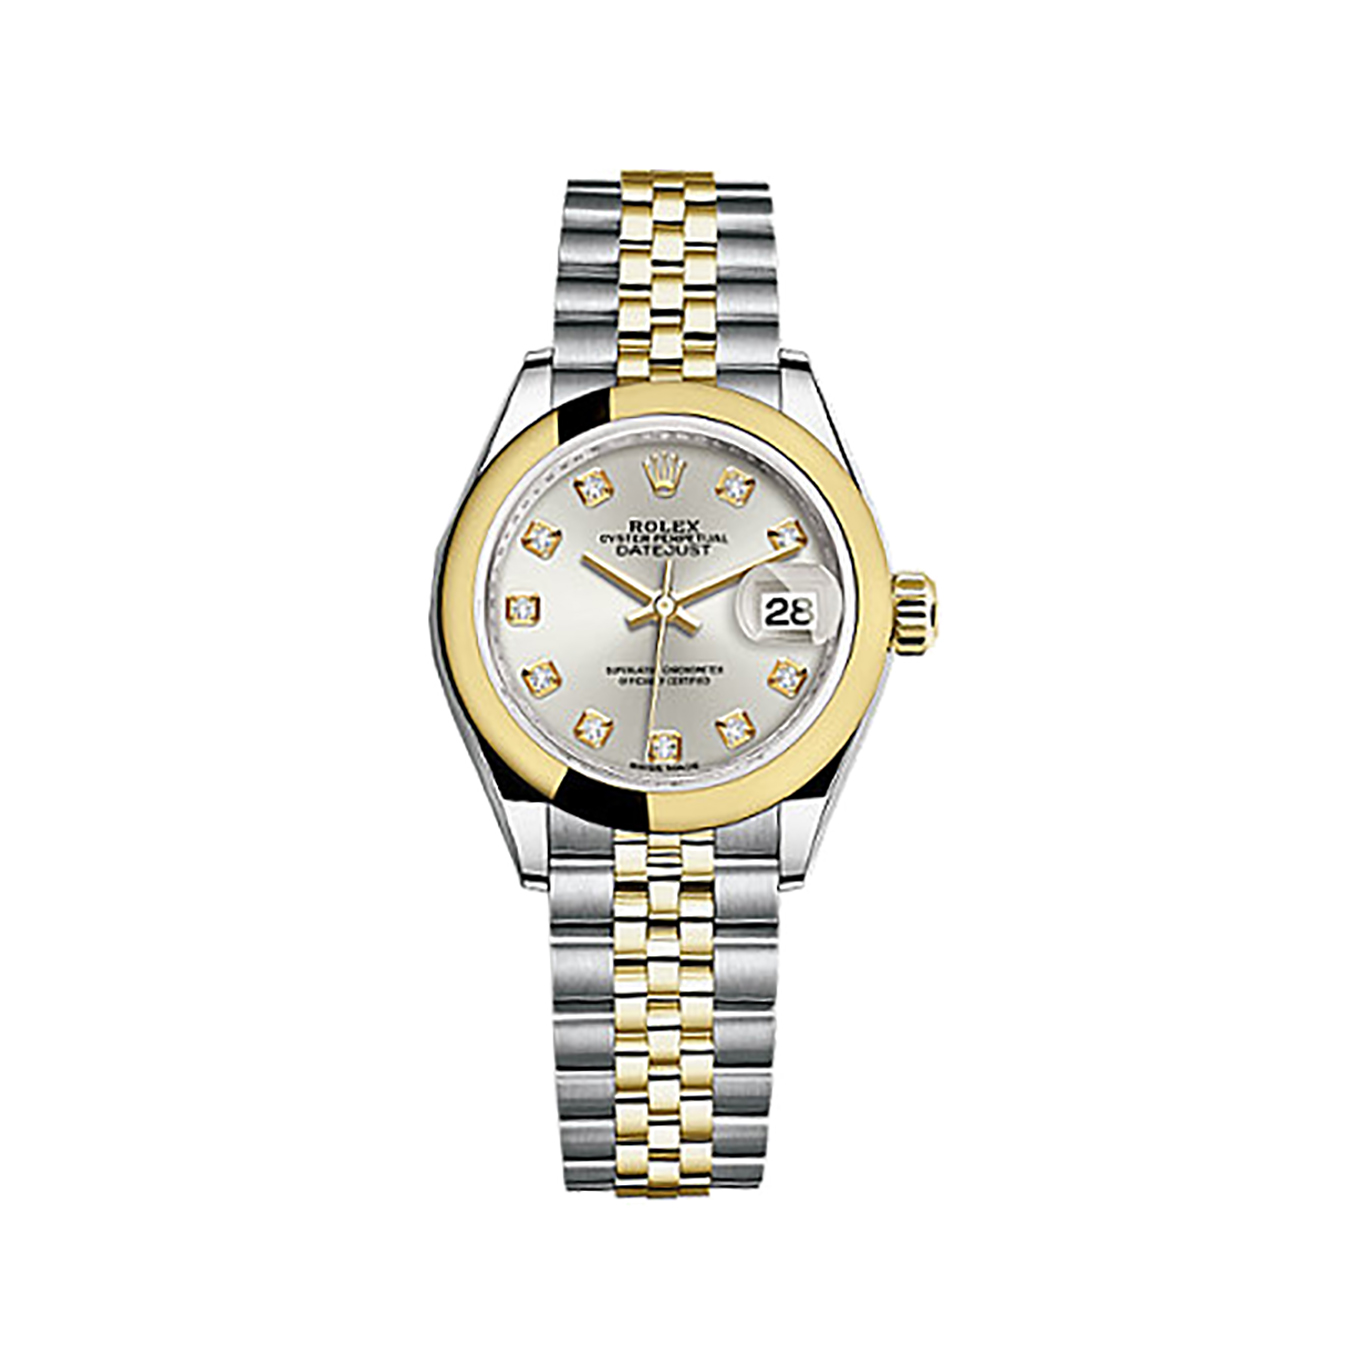 Lady-Datejust 28 279163 Gold & Stainless Steel Watch (Silver Set with Diamonds)